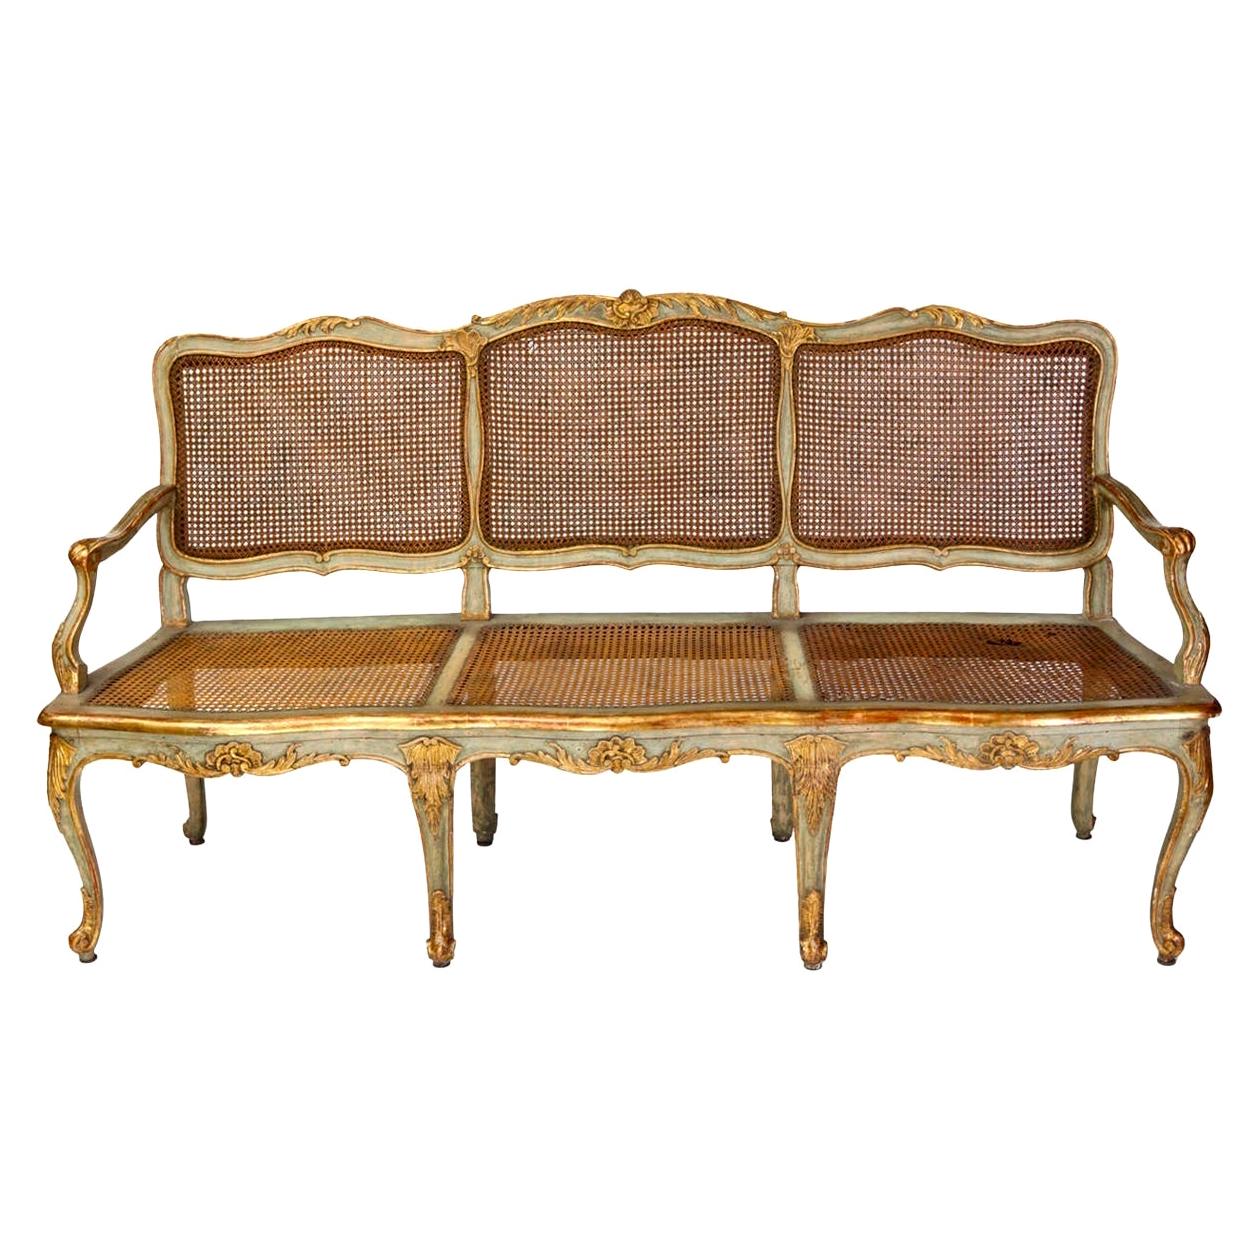 Italian Parcel-Gilt and Painted Canape or Sofa, 18th Century